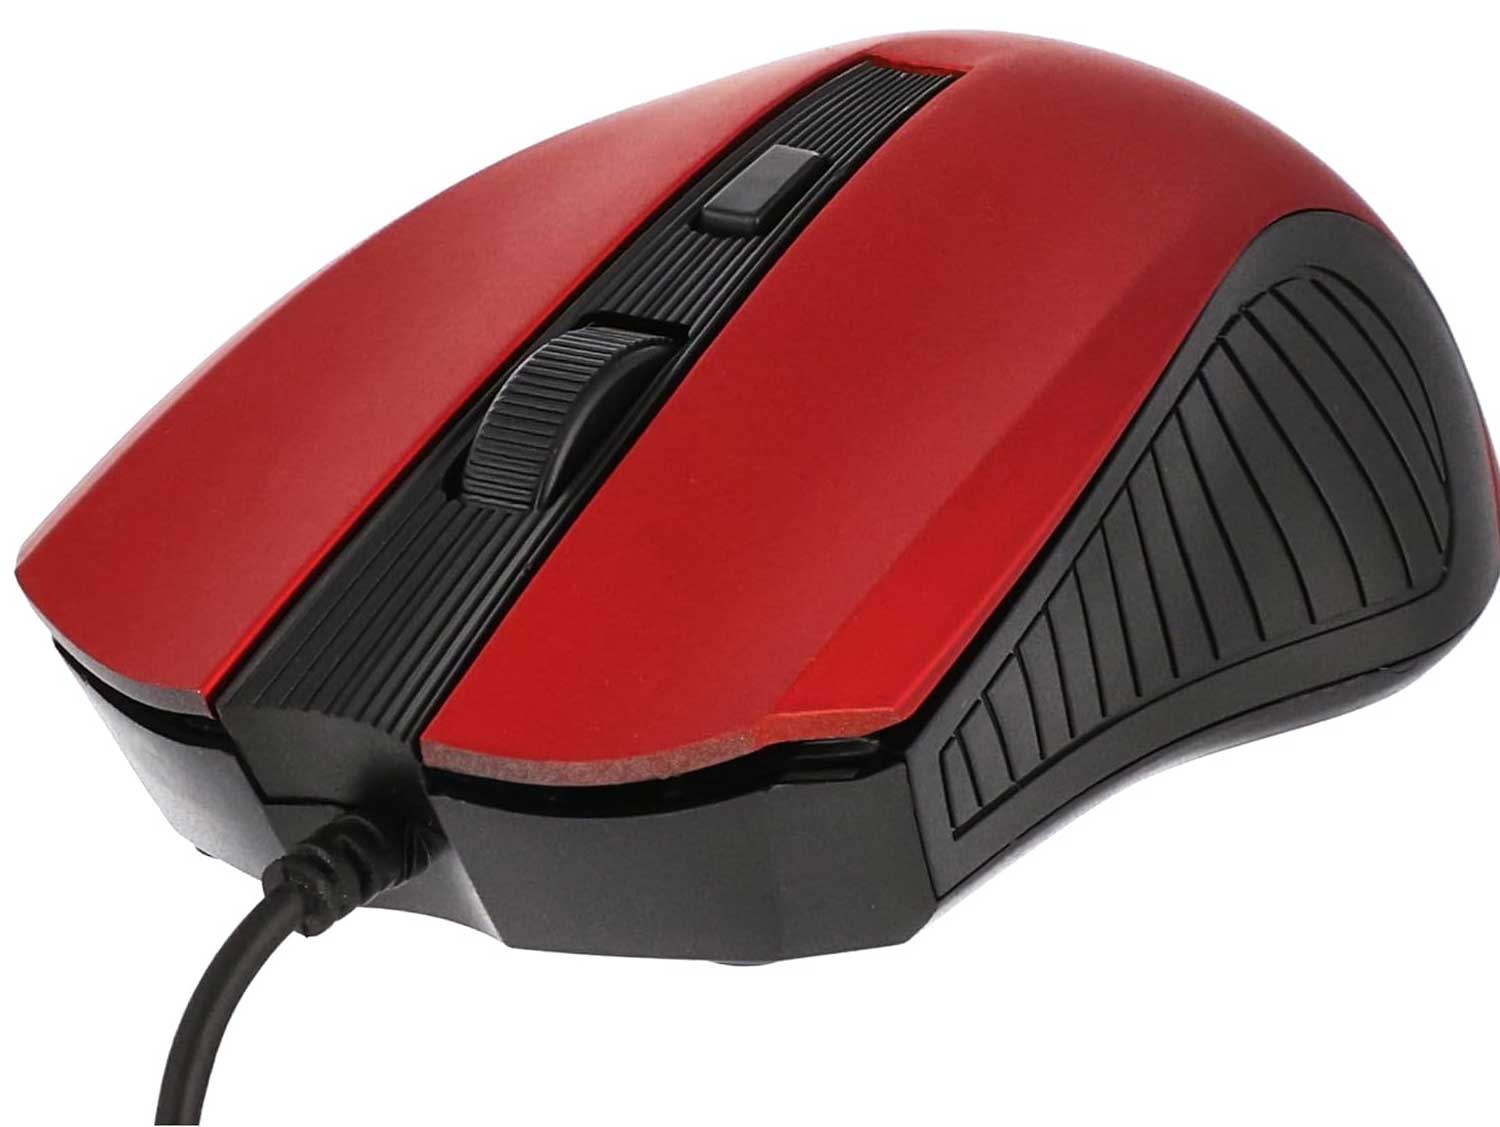 Havit HV-MS752 Wired Optical Mouse Front View